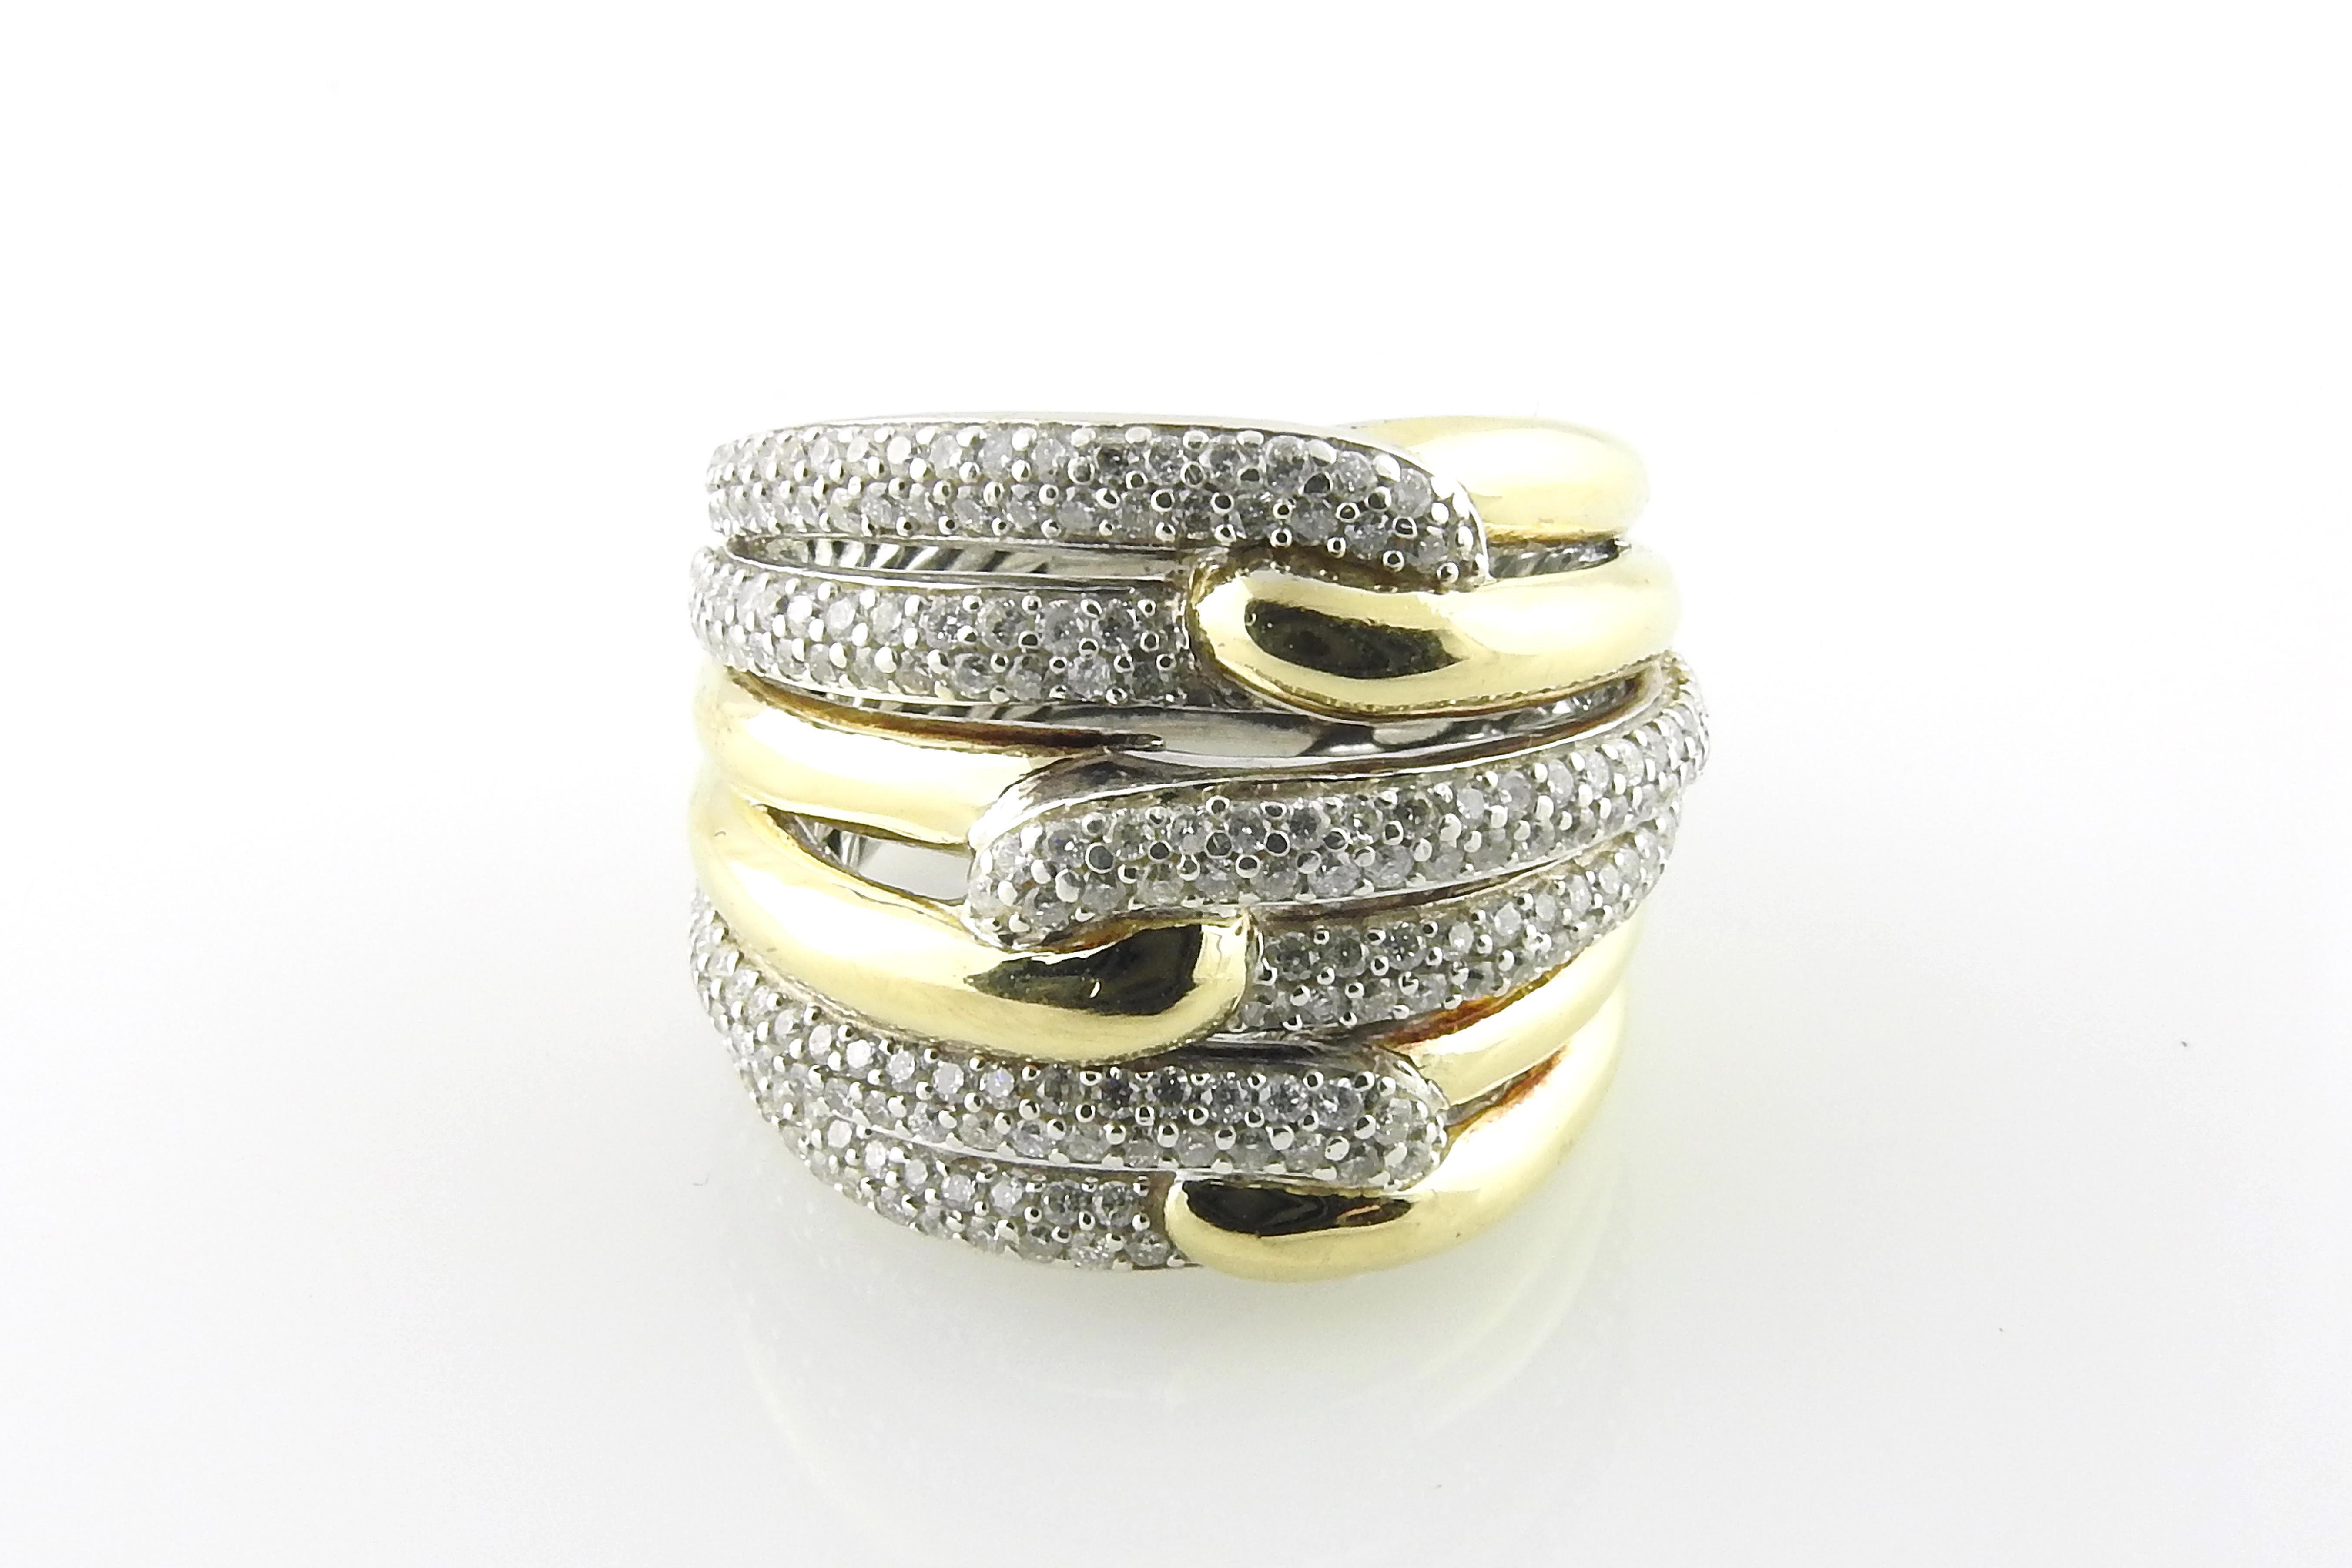 David Yurman Triple Loop Labyrinth Diamond Band

This stunning David Yurman ring is set in 18K yellow gold and sterling silver

White pave diamonds are set in white gold in front of ring

Approx. 1ct in diamonds. VS clarity, G color

Band is approx.